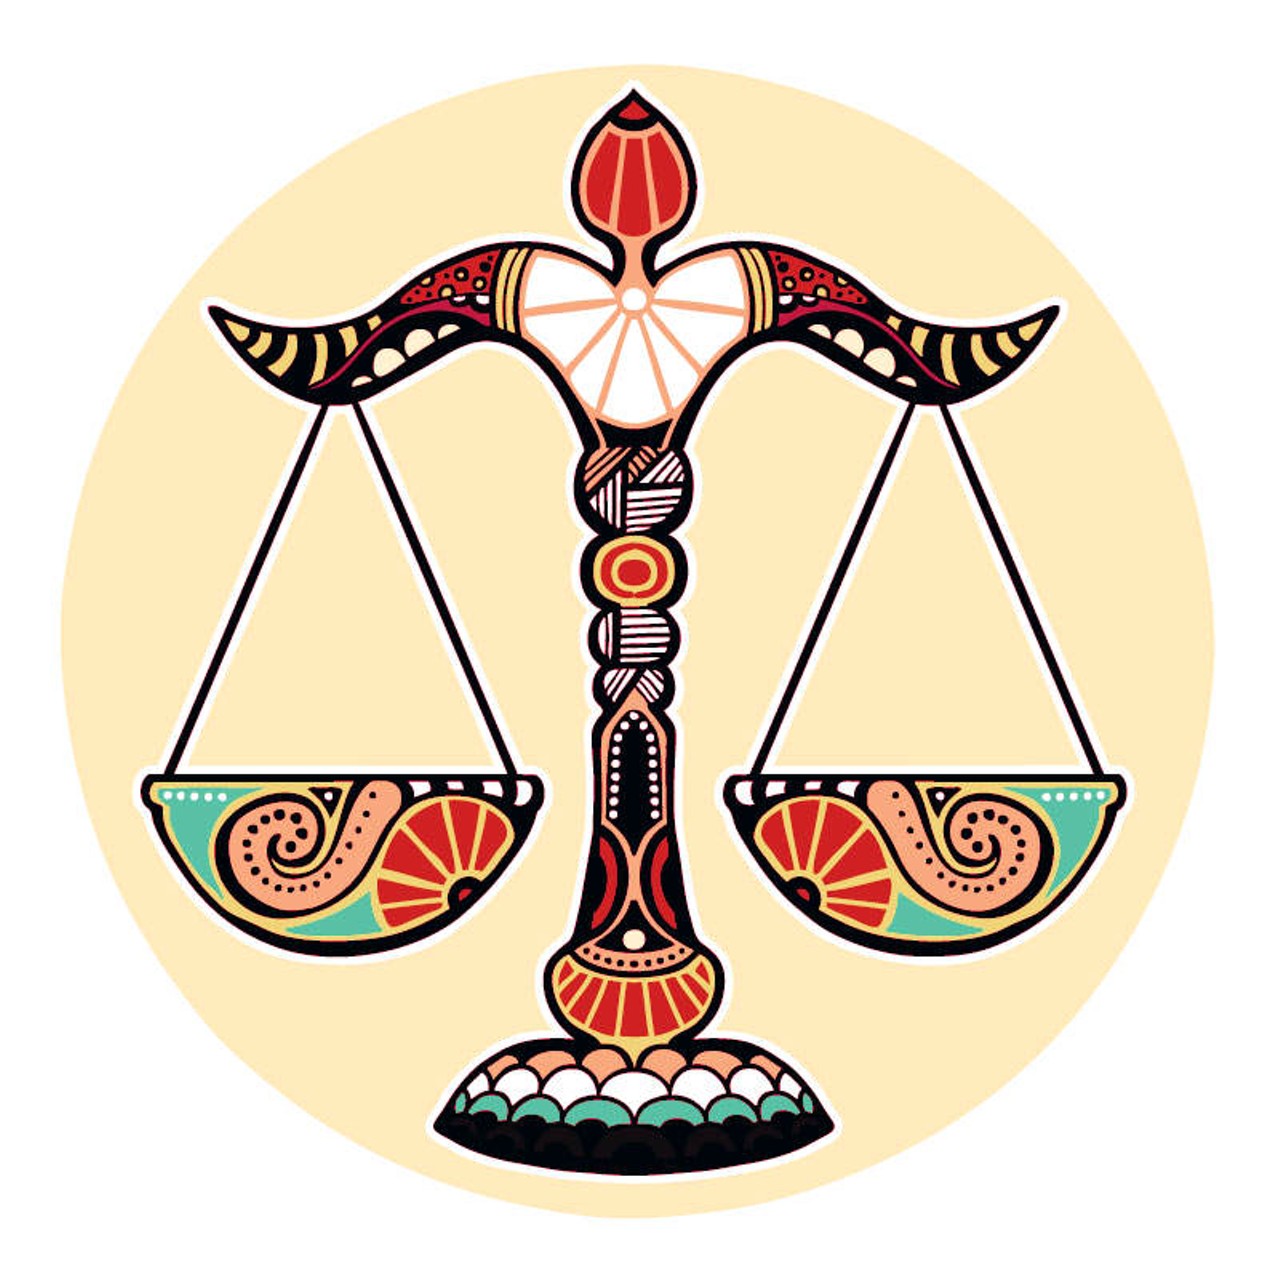 LIBRA: Sept. 21 &#150; Oct. 20
Before you jump down anyone's throat, make sure you have your facts straight. The tendency to assume way too much is making it hard for you to get what you want out of this. Whoever's driving you nuts might as well be 4 years old. The next time you get into a tiff with them it will help you to remember that it took them forever to get this messed up. Stop needing to be right about everything. If you can detach enough to stop judging them and listen to their story with an open heart you will be able to communicate well enough to fix what isn't working here.